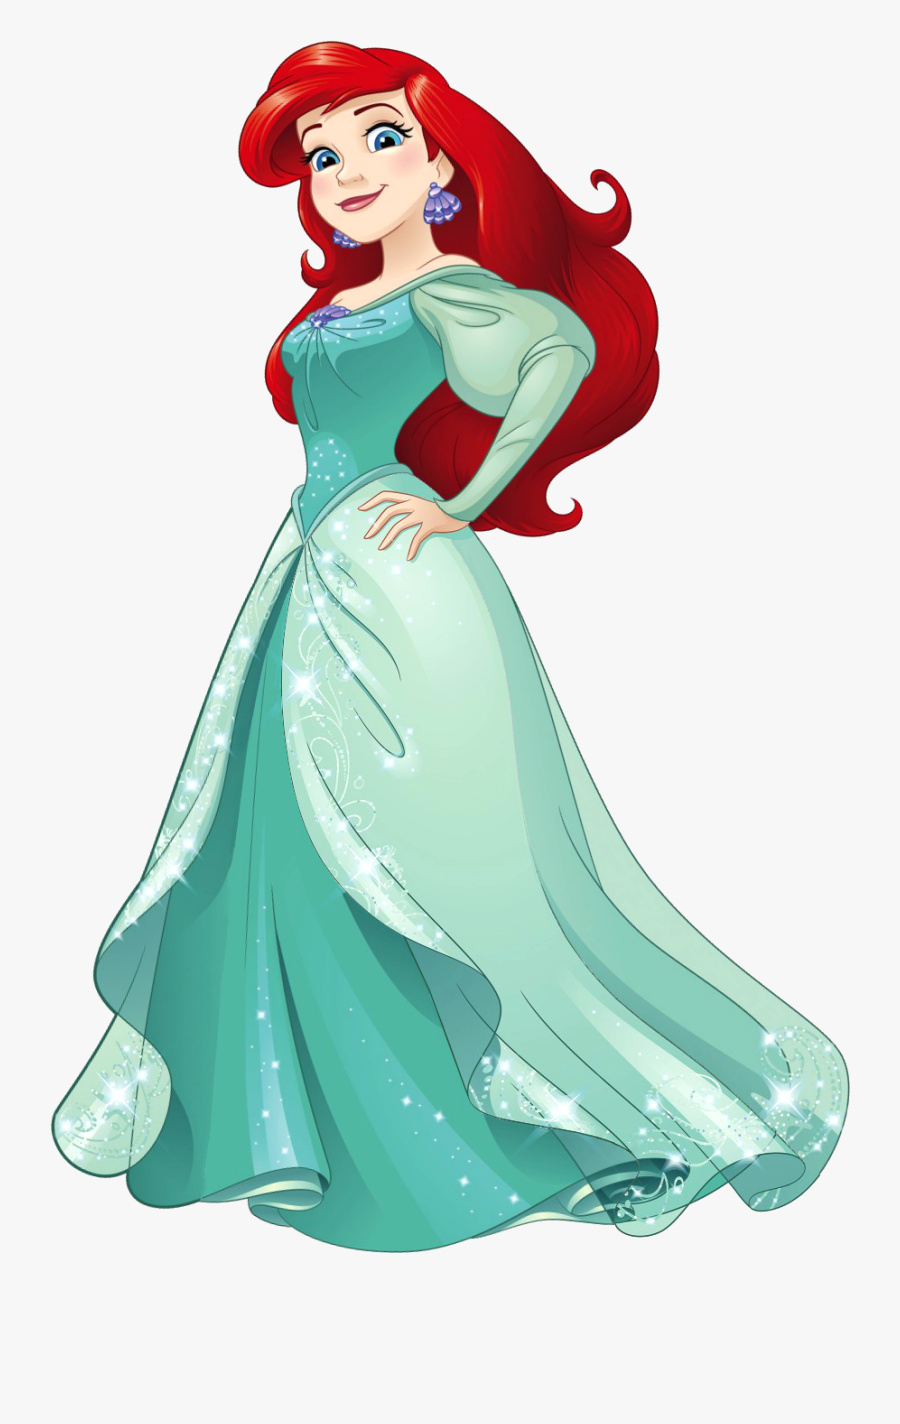 In Her Turquoise Dress - Little Mermaid Princess Ariel, Transparent Clipart